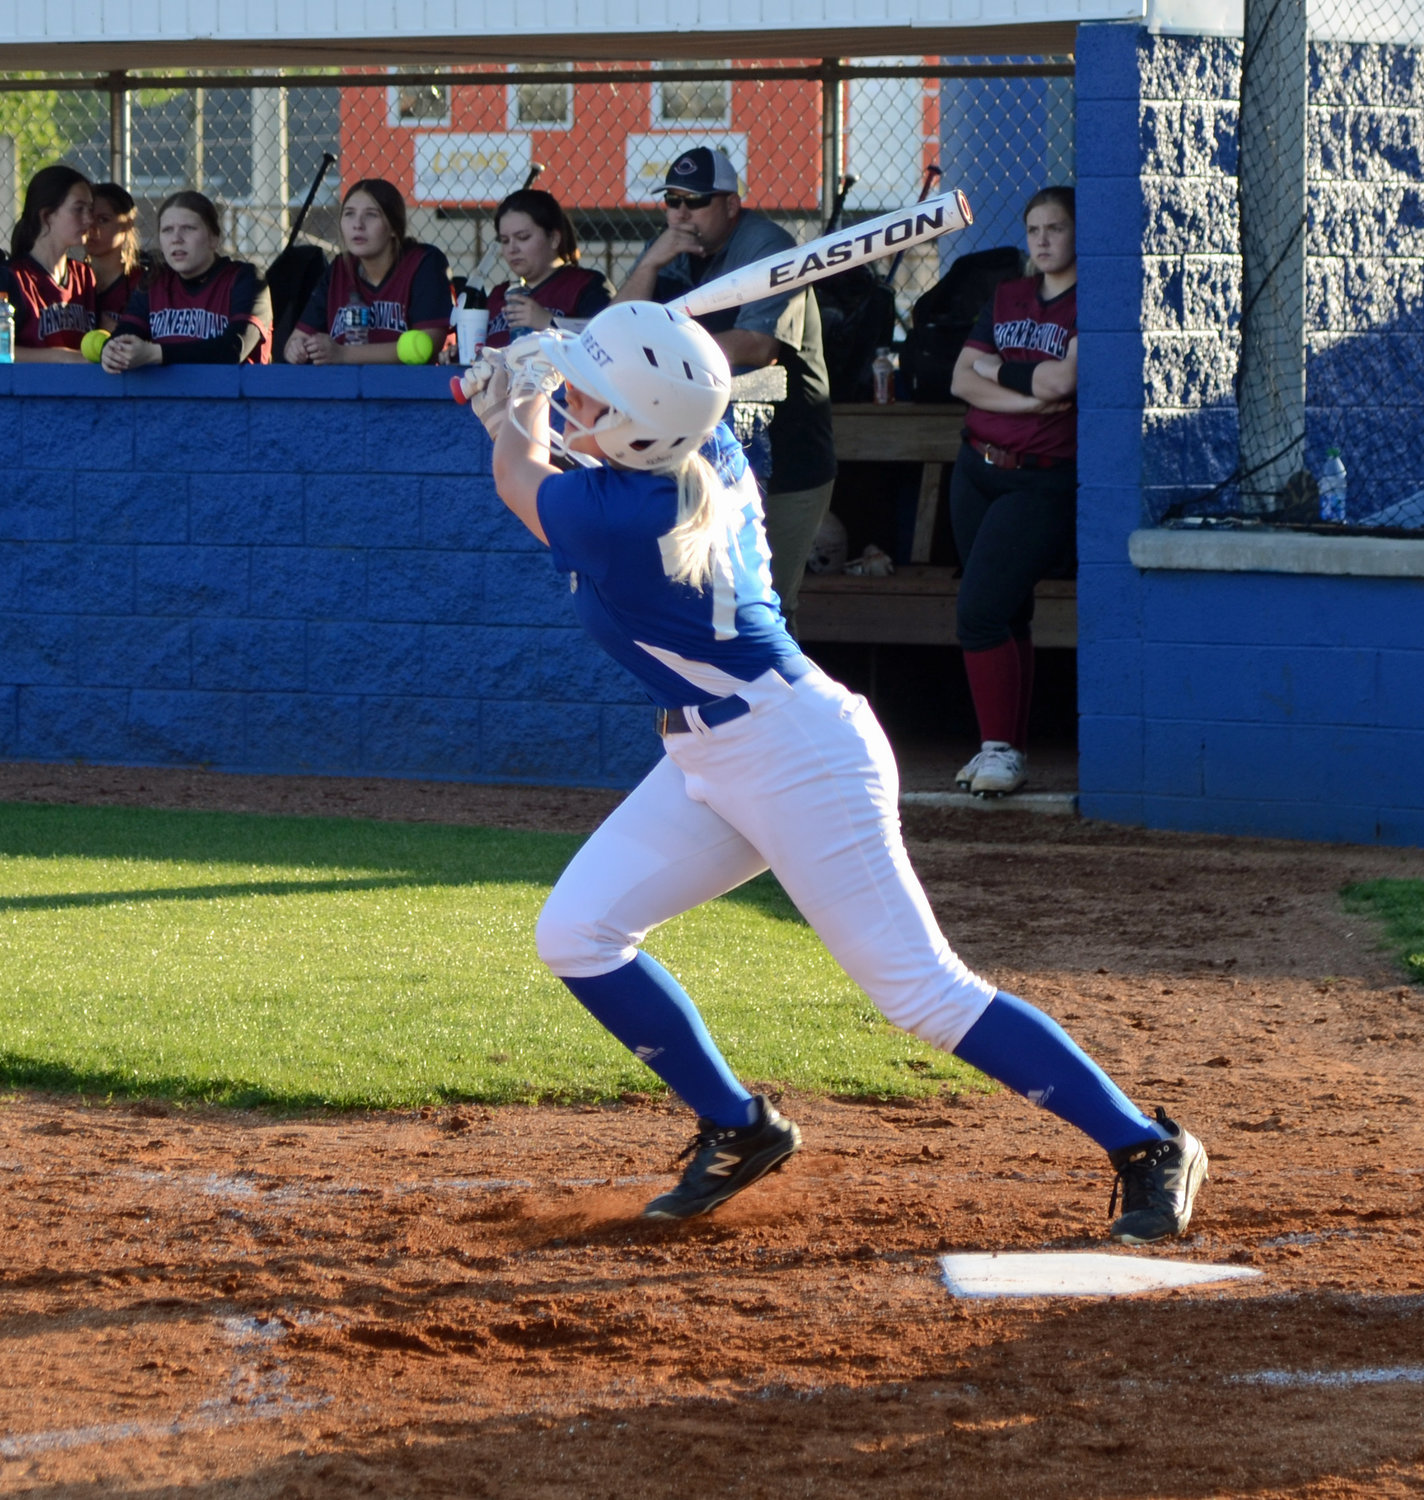 Jenna Goodman went 2-for-2 with two runs scored for the Lady Rockets.